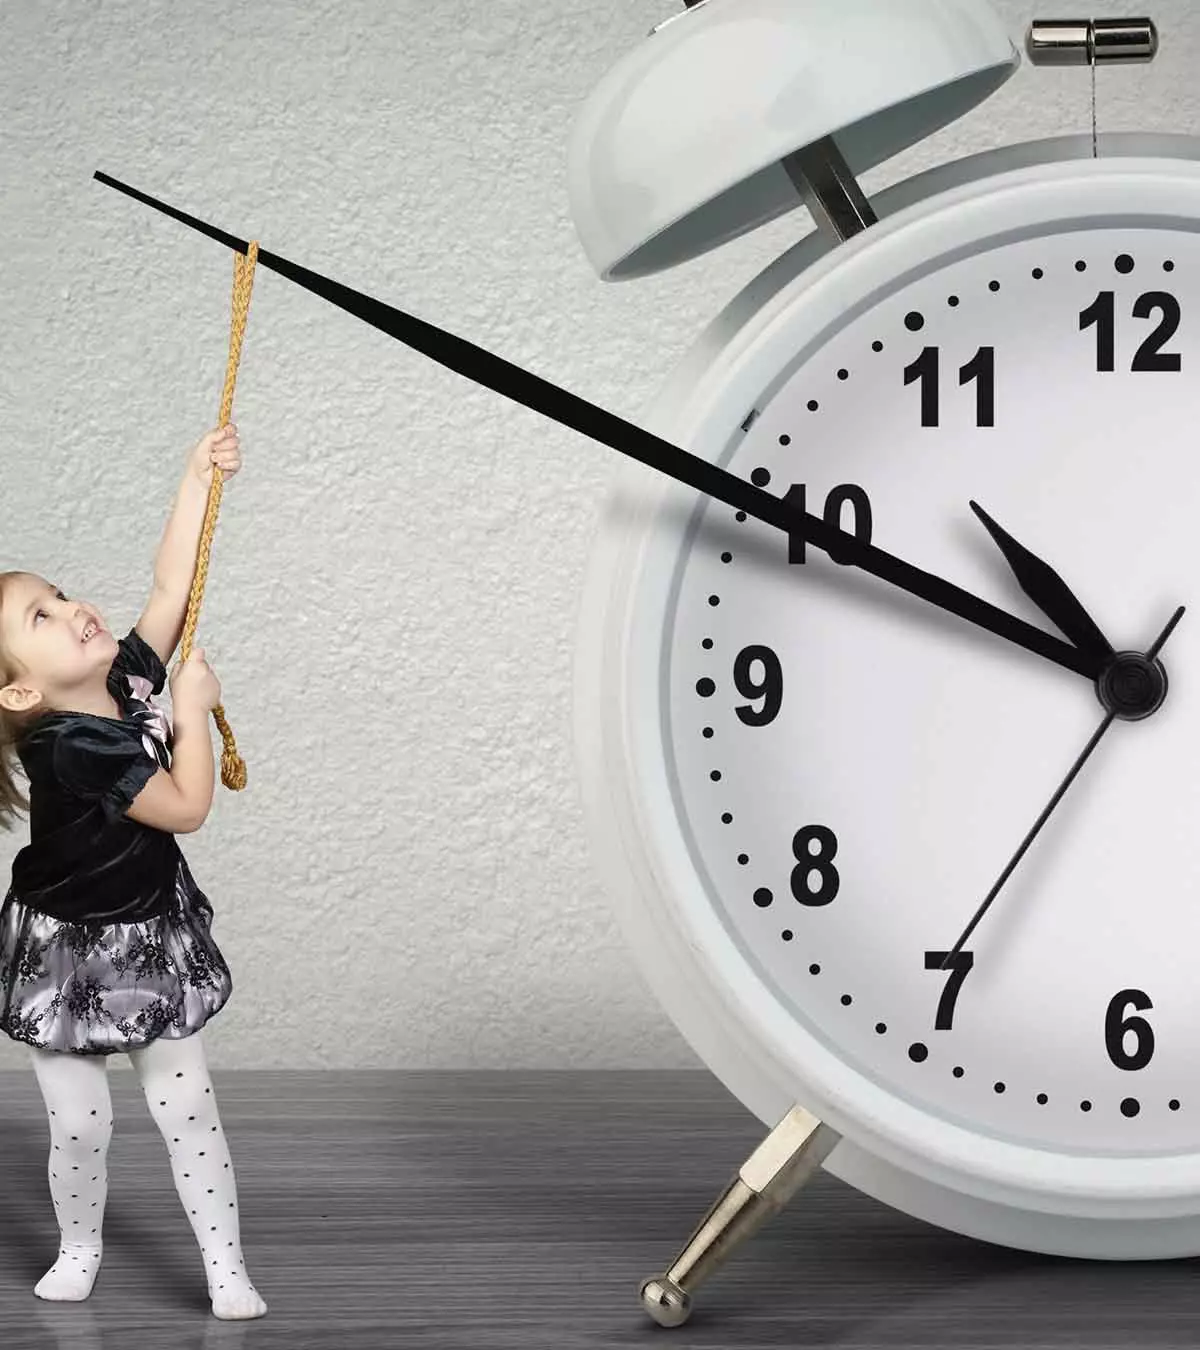 25 Simple Ways To Teach Time Management For Kids